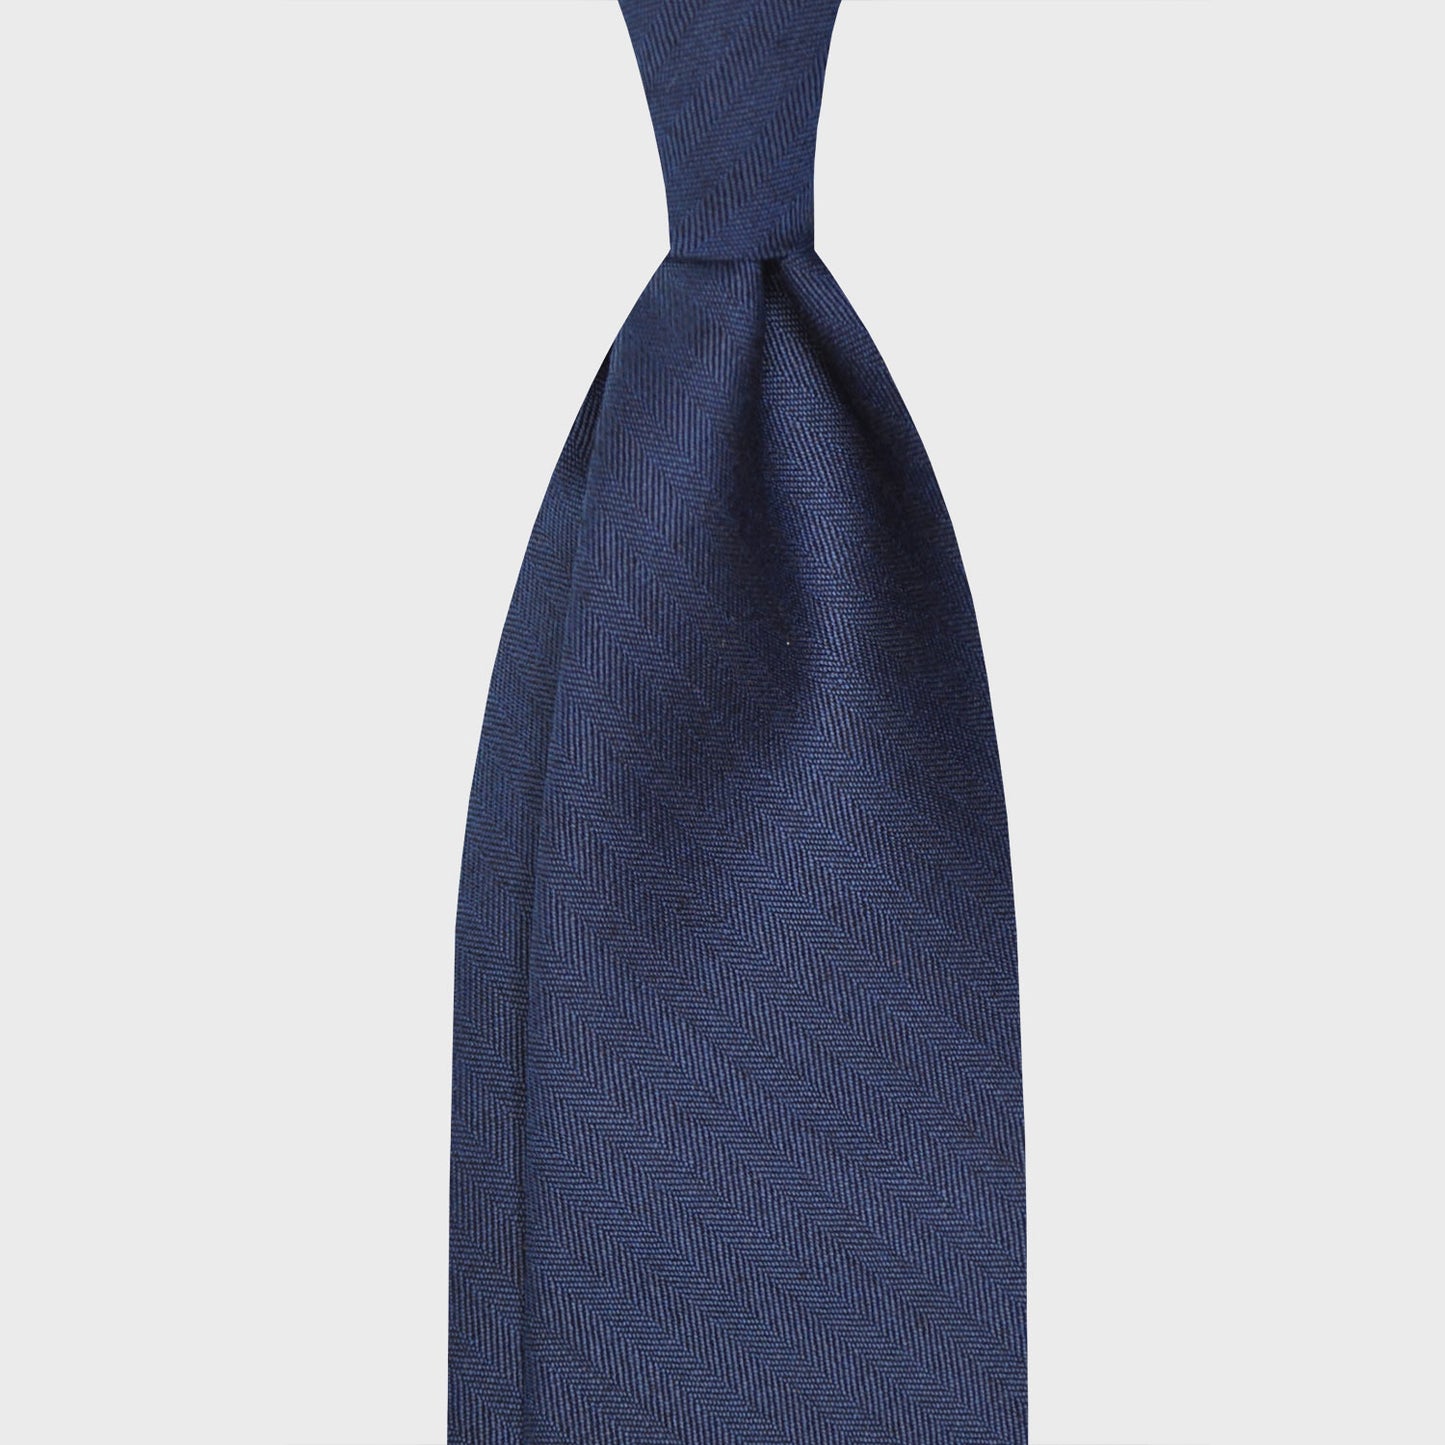 Oxford Blue Solaro Tie Holland&Sherry Wool. Elegant wool tie made with the iconic Hollande & Sherry solaro fabric 120's oxford blue color, unlined 3 folds, handmade tie F.Marino Napoli for Wools Boutique Uomo